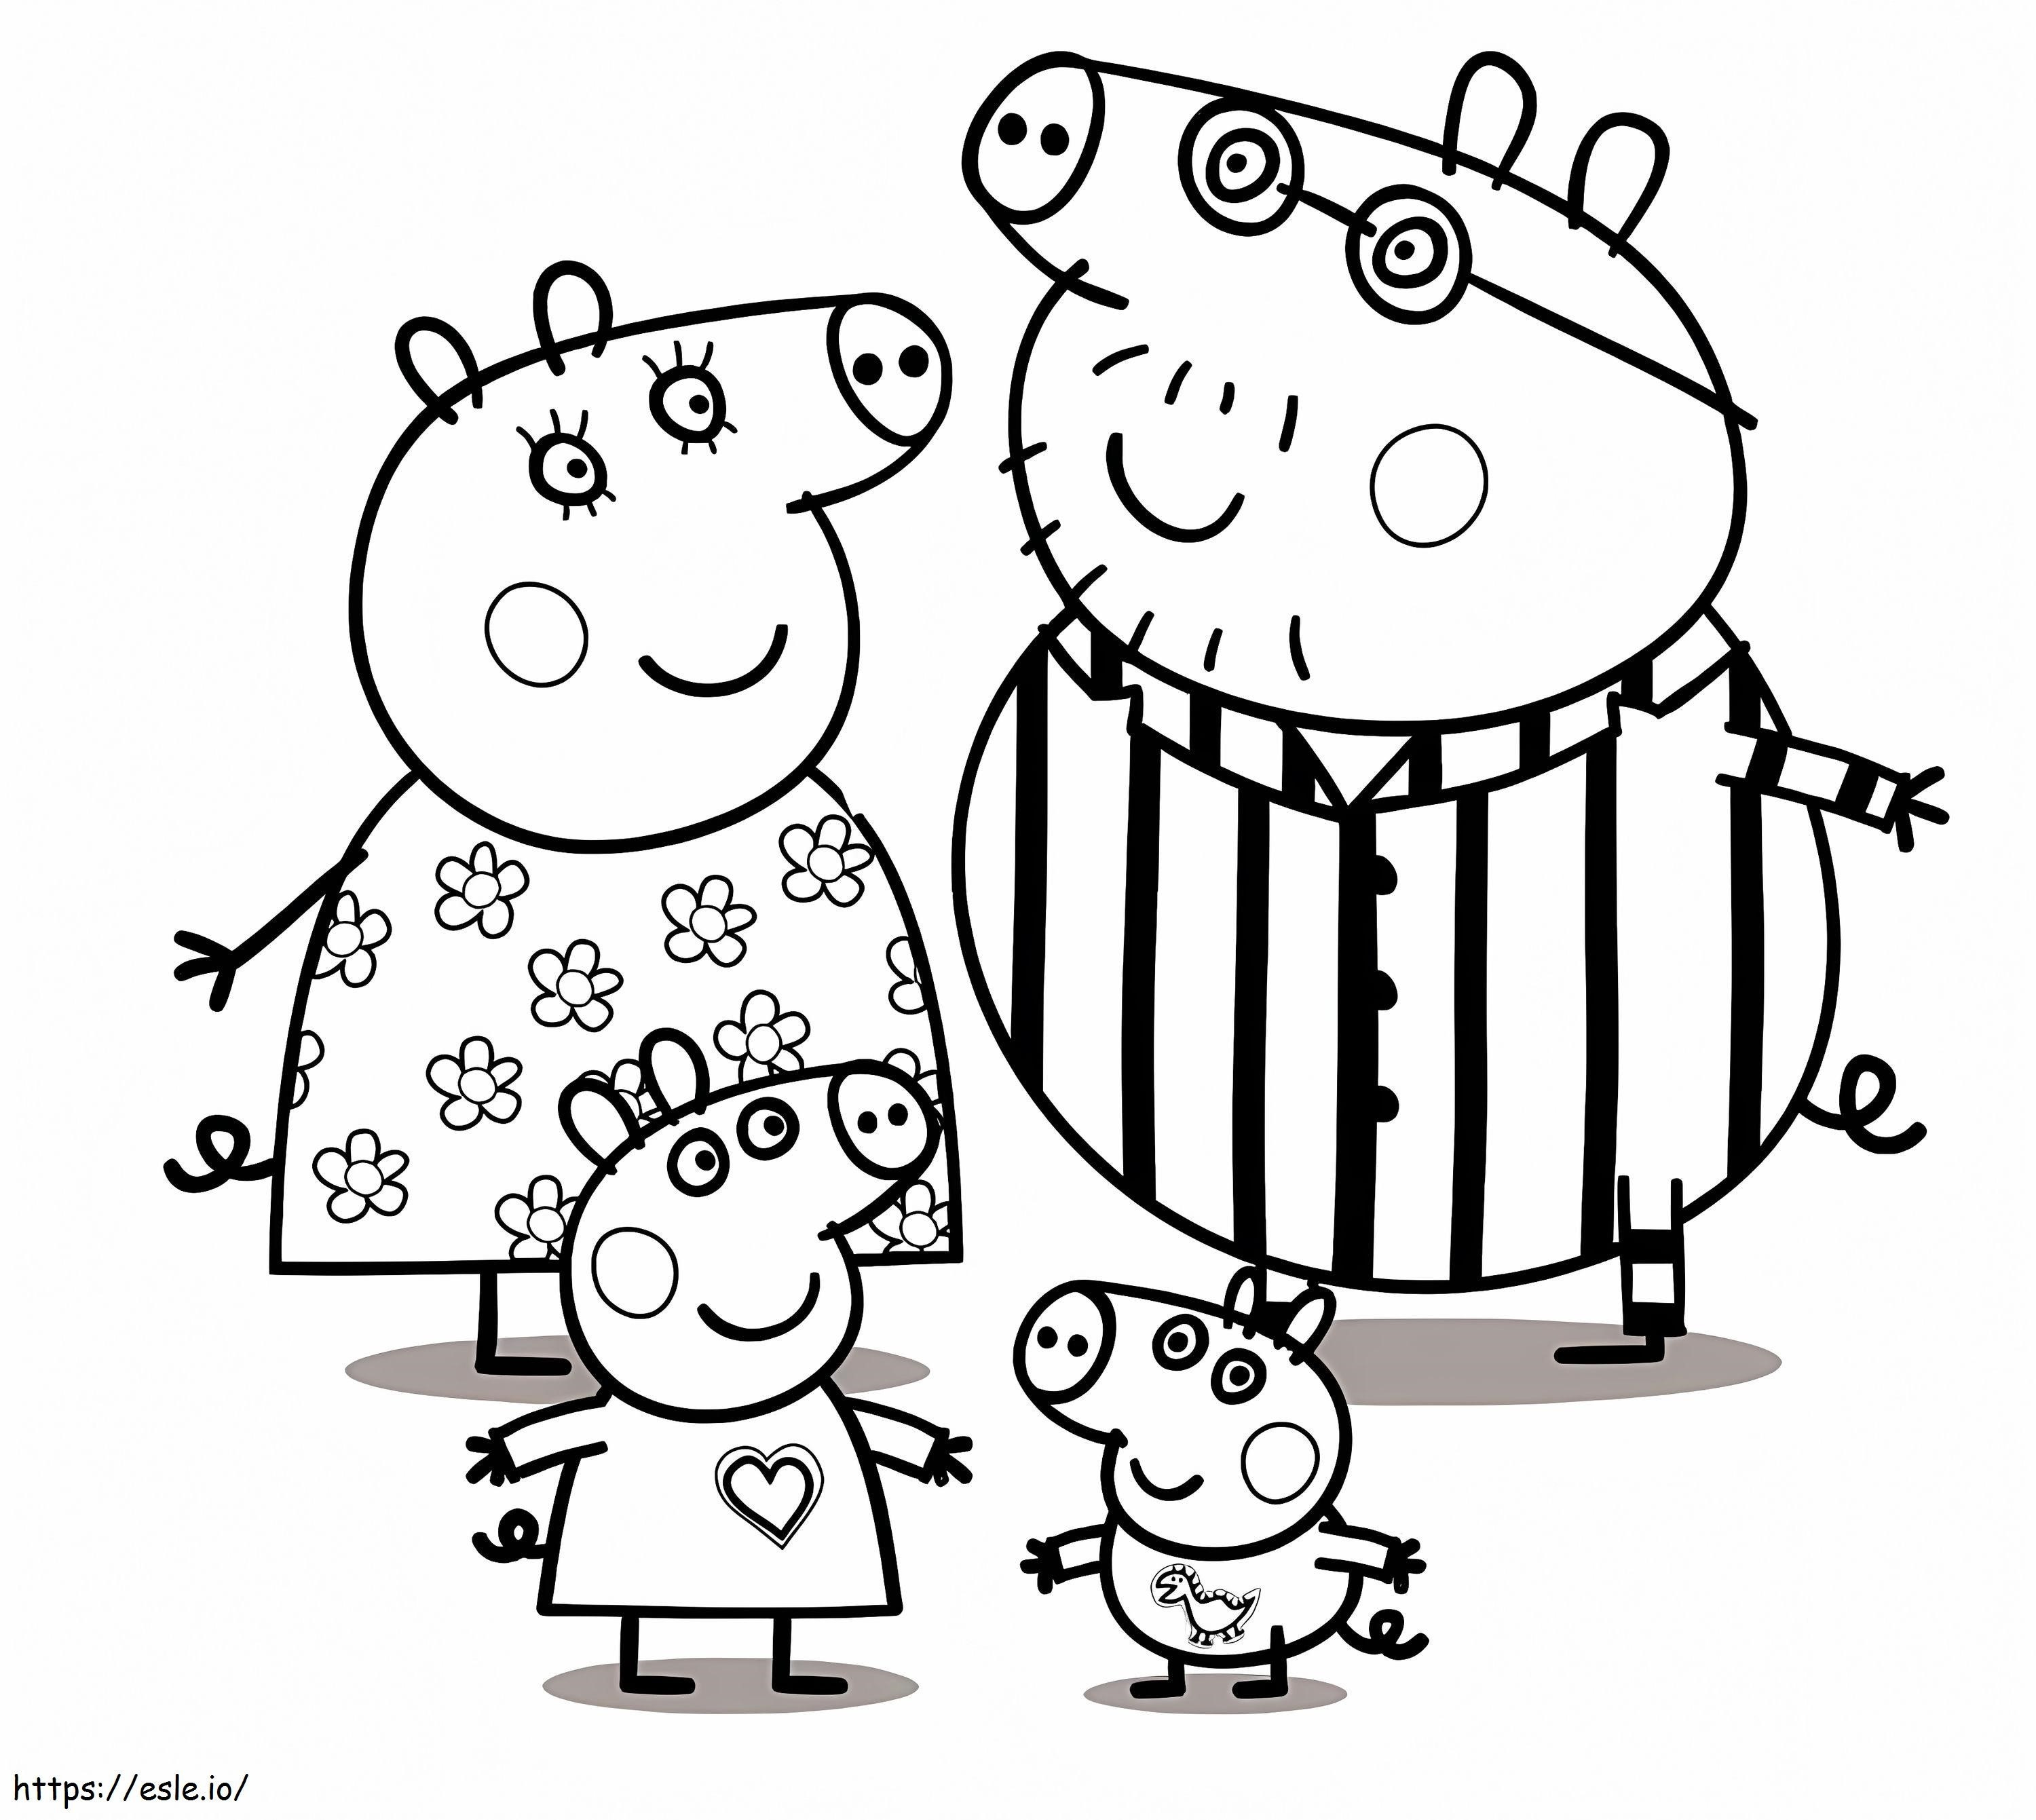 Peppa Pig Family In Pyjamas coloring page